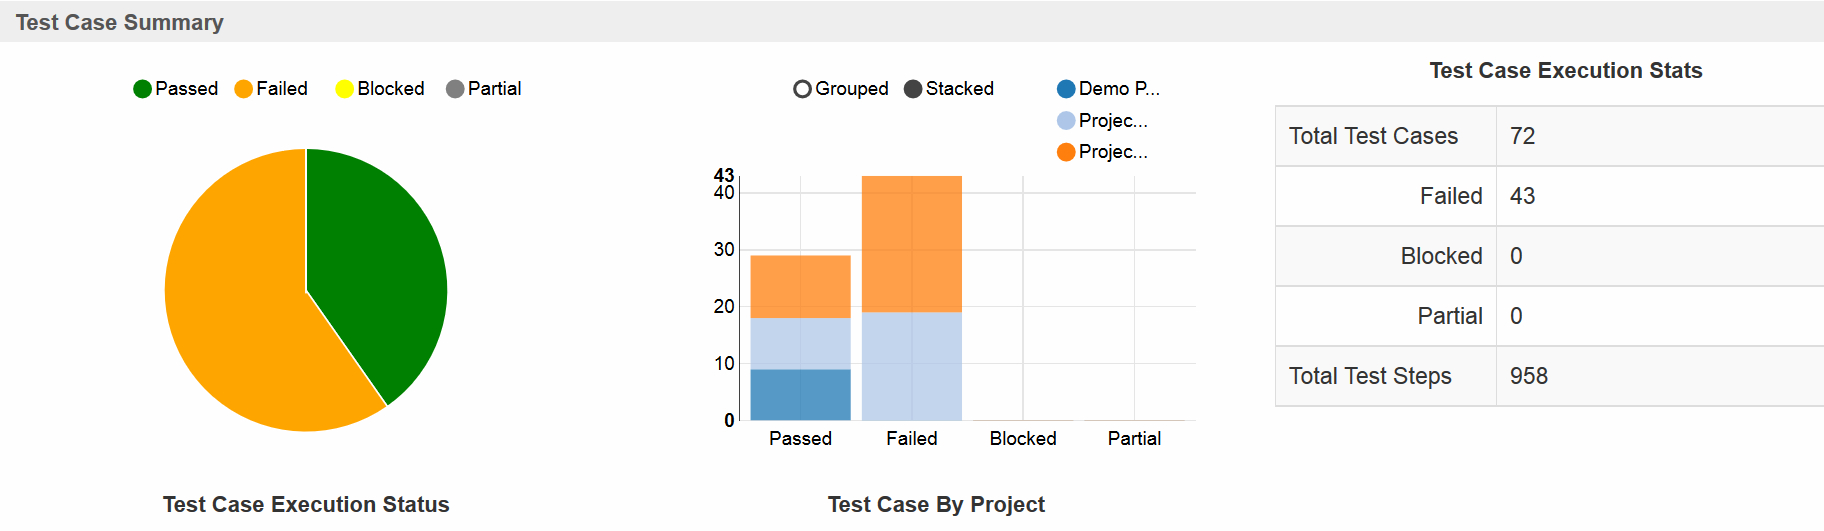 Test Case Execution Report Template ] – Visual Studio 2015 For Test Case Execution Report Template